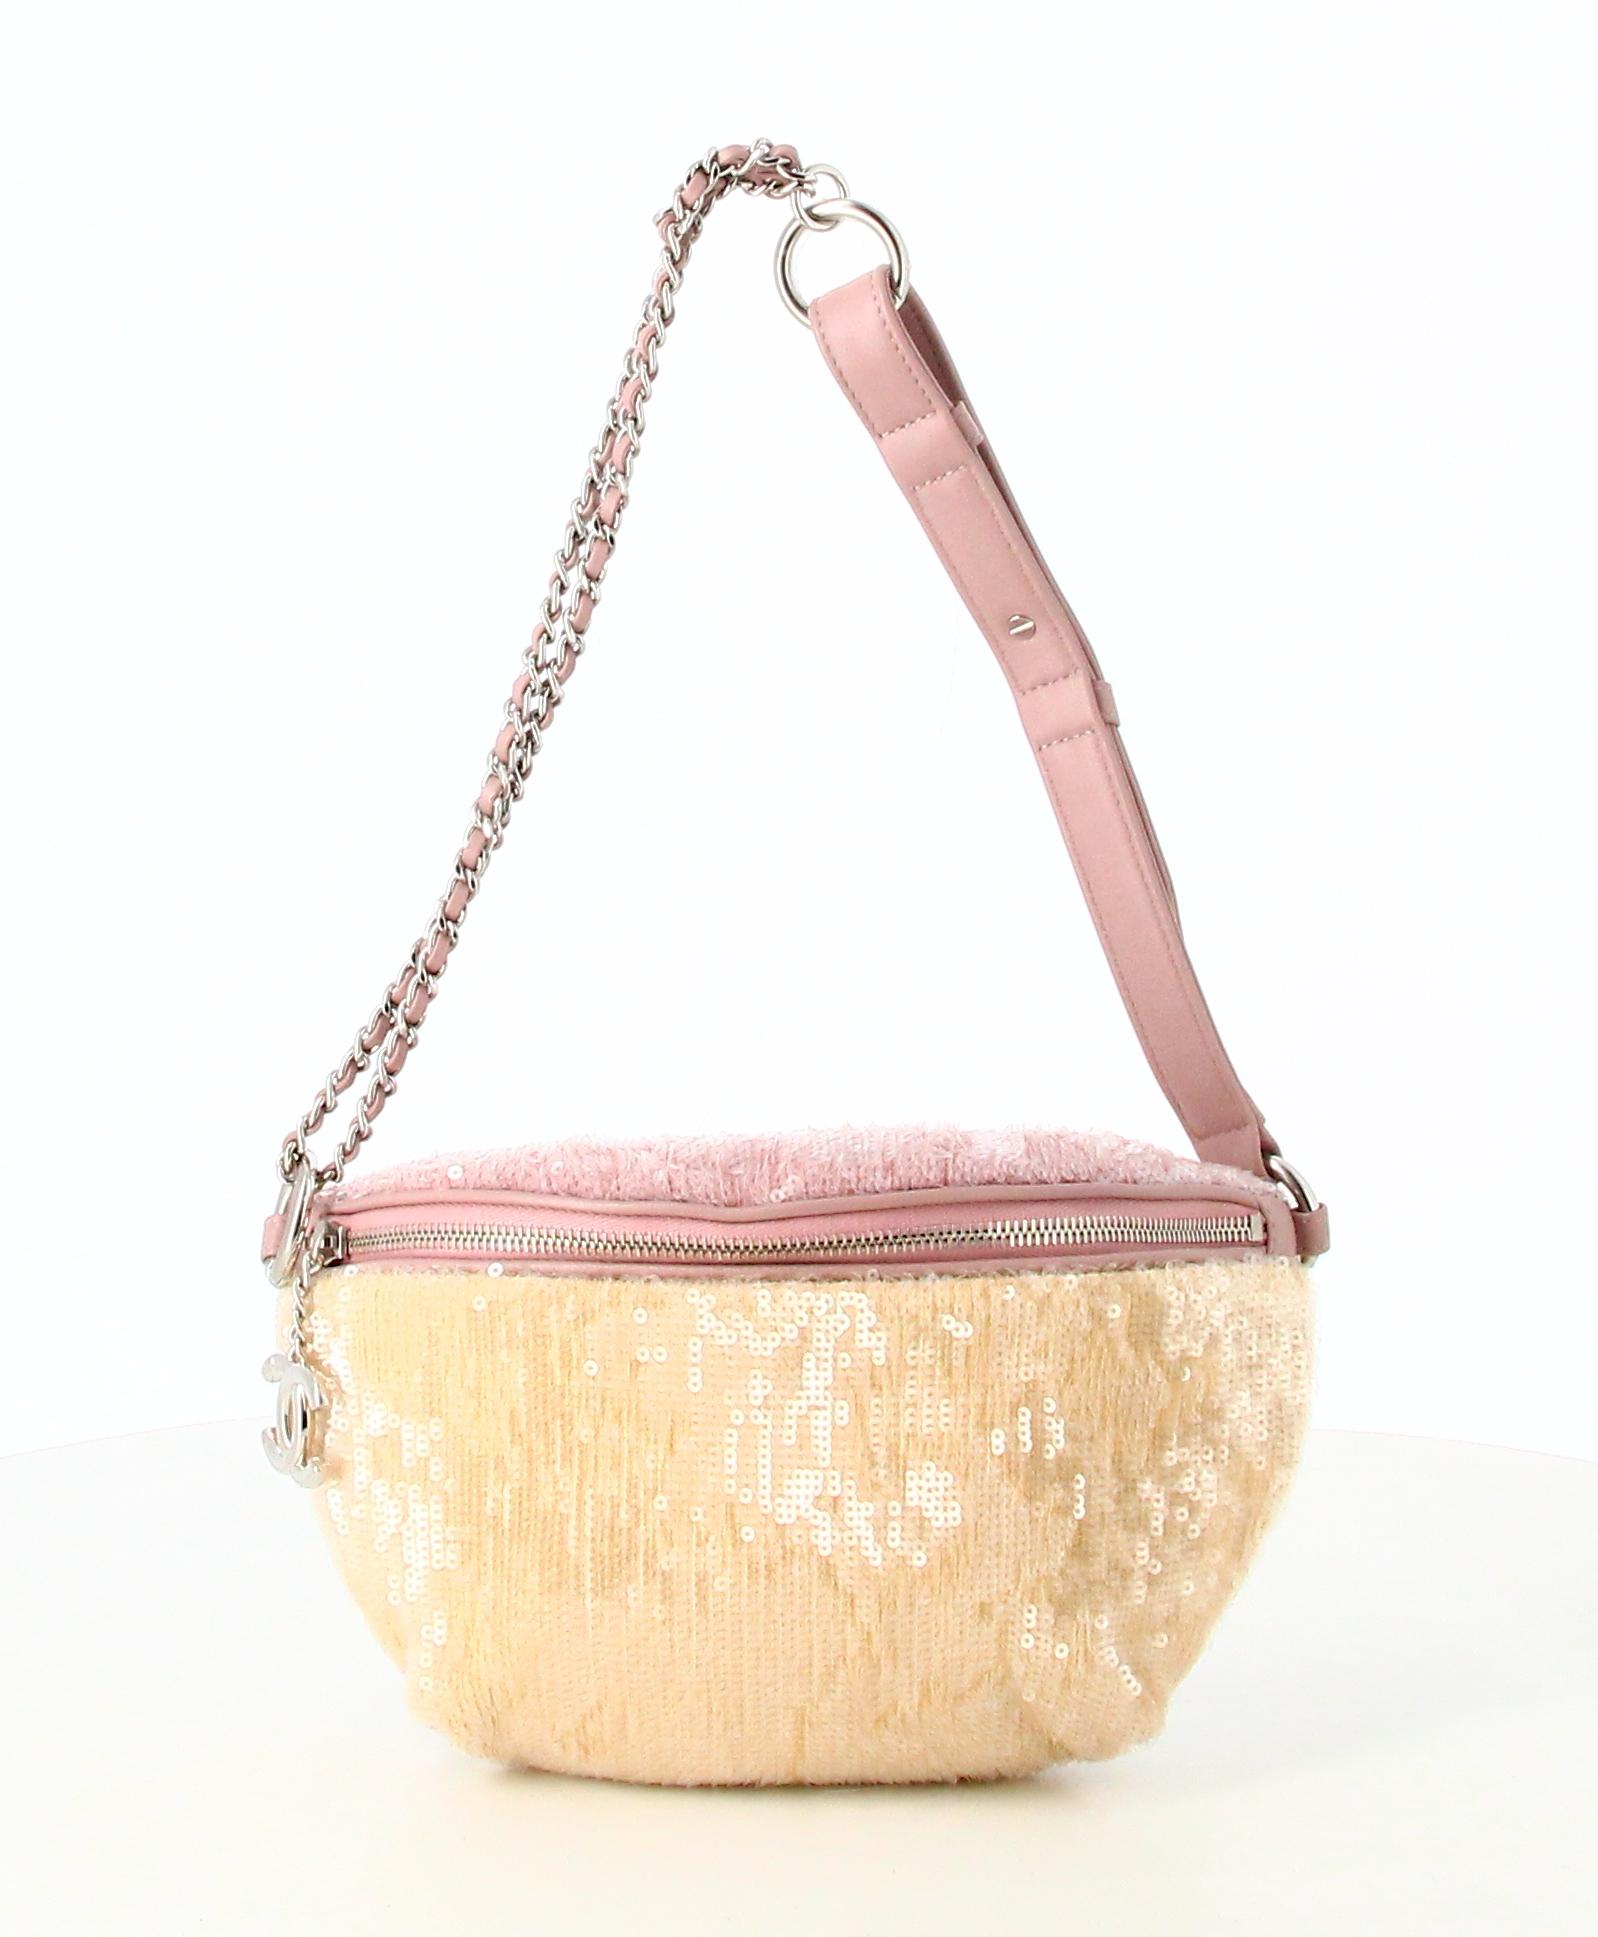 2018 Chanel Rose Beige and Grey Strass Banana Handbag  In Good Condition For Sale In PARIS, FR